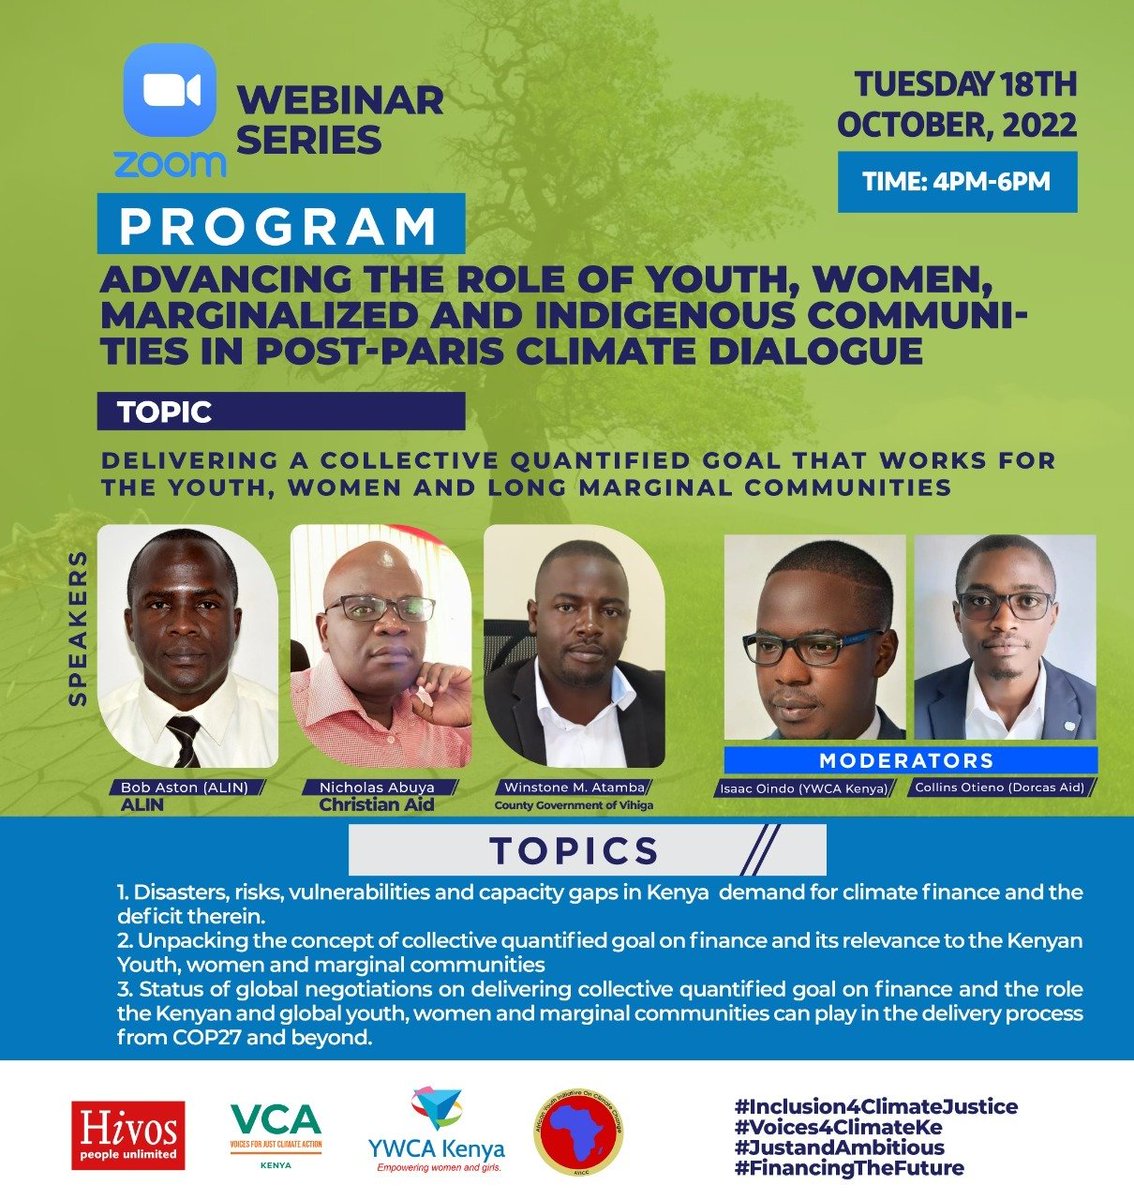 Happening today
This is a platform that every youth should engage in
@KenyaYwca @hivosroea